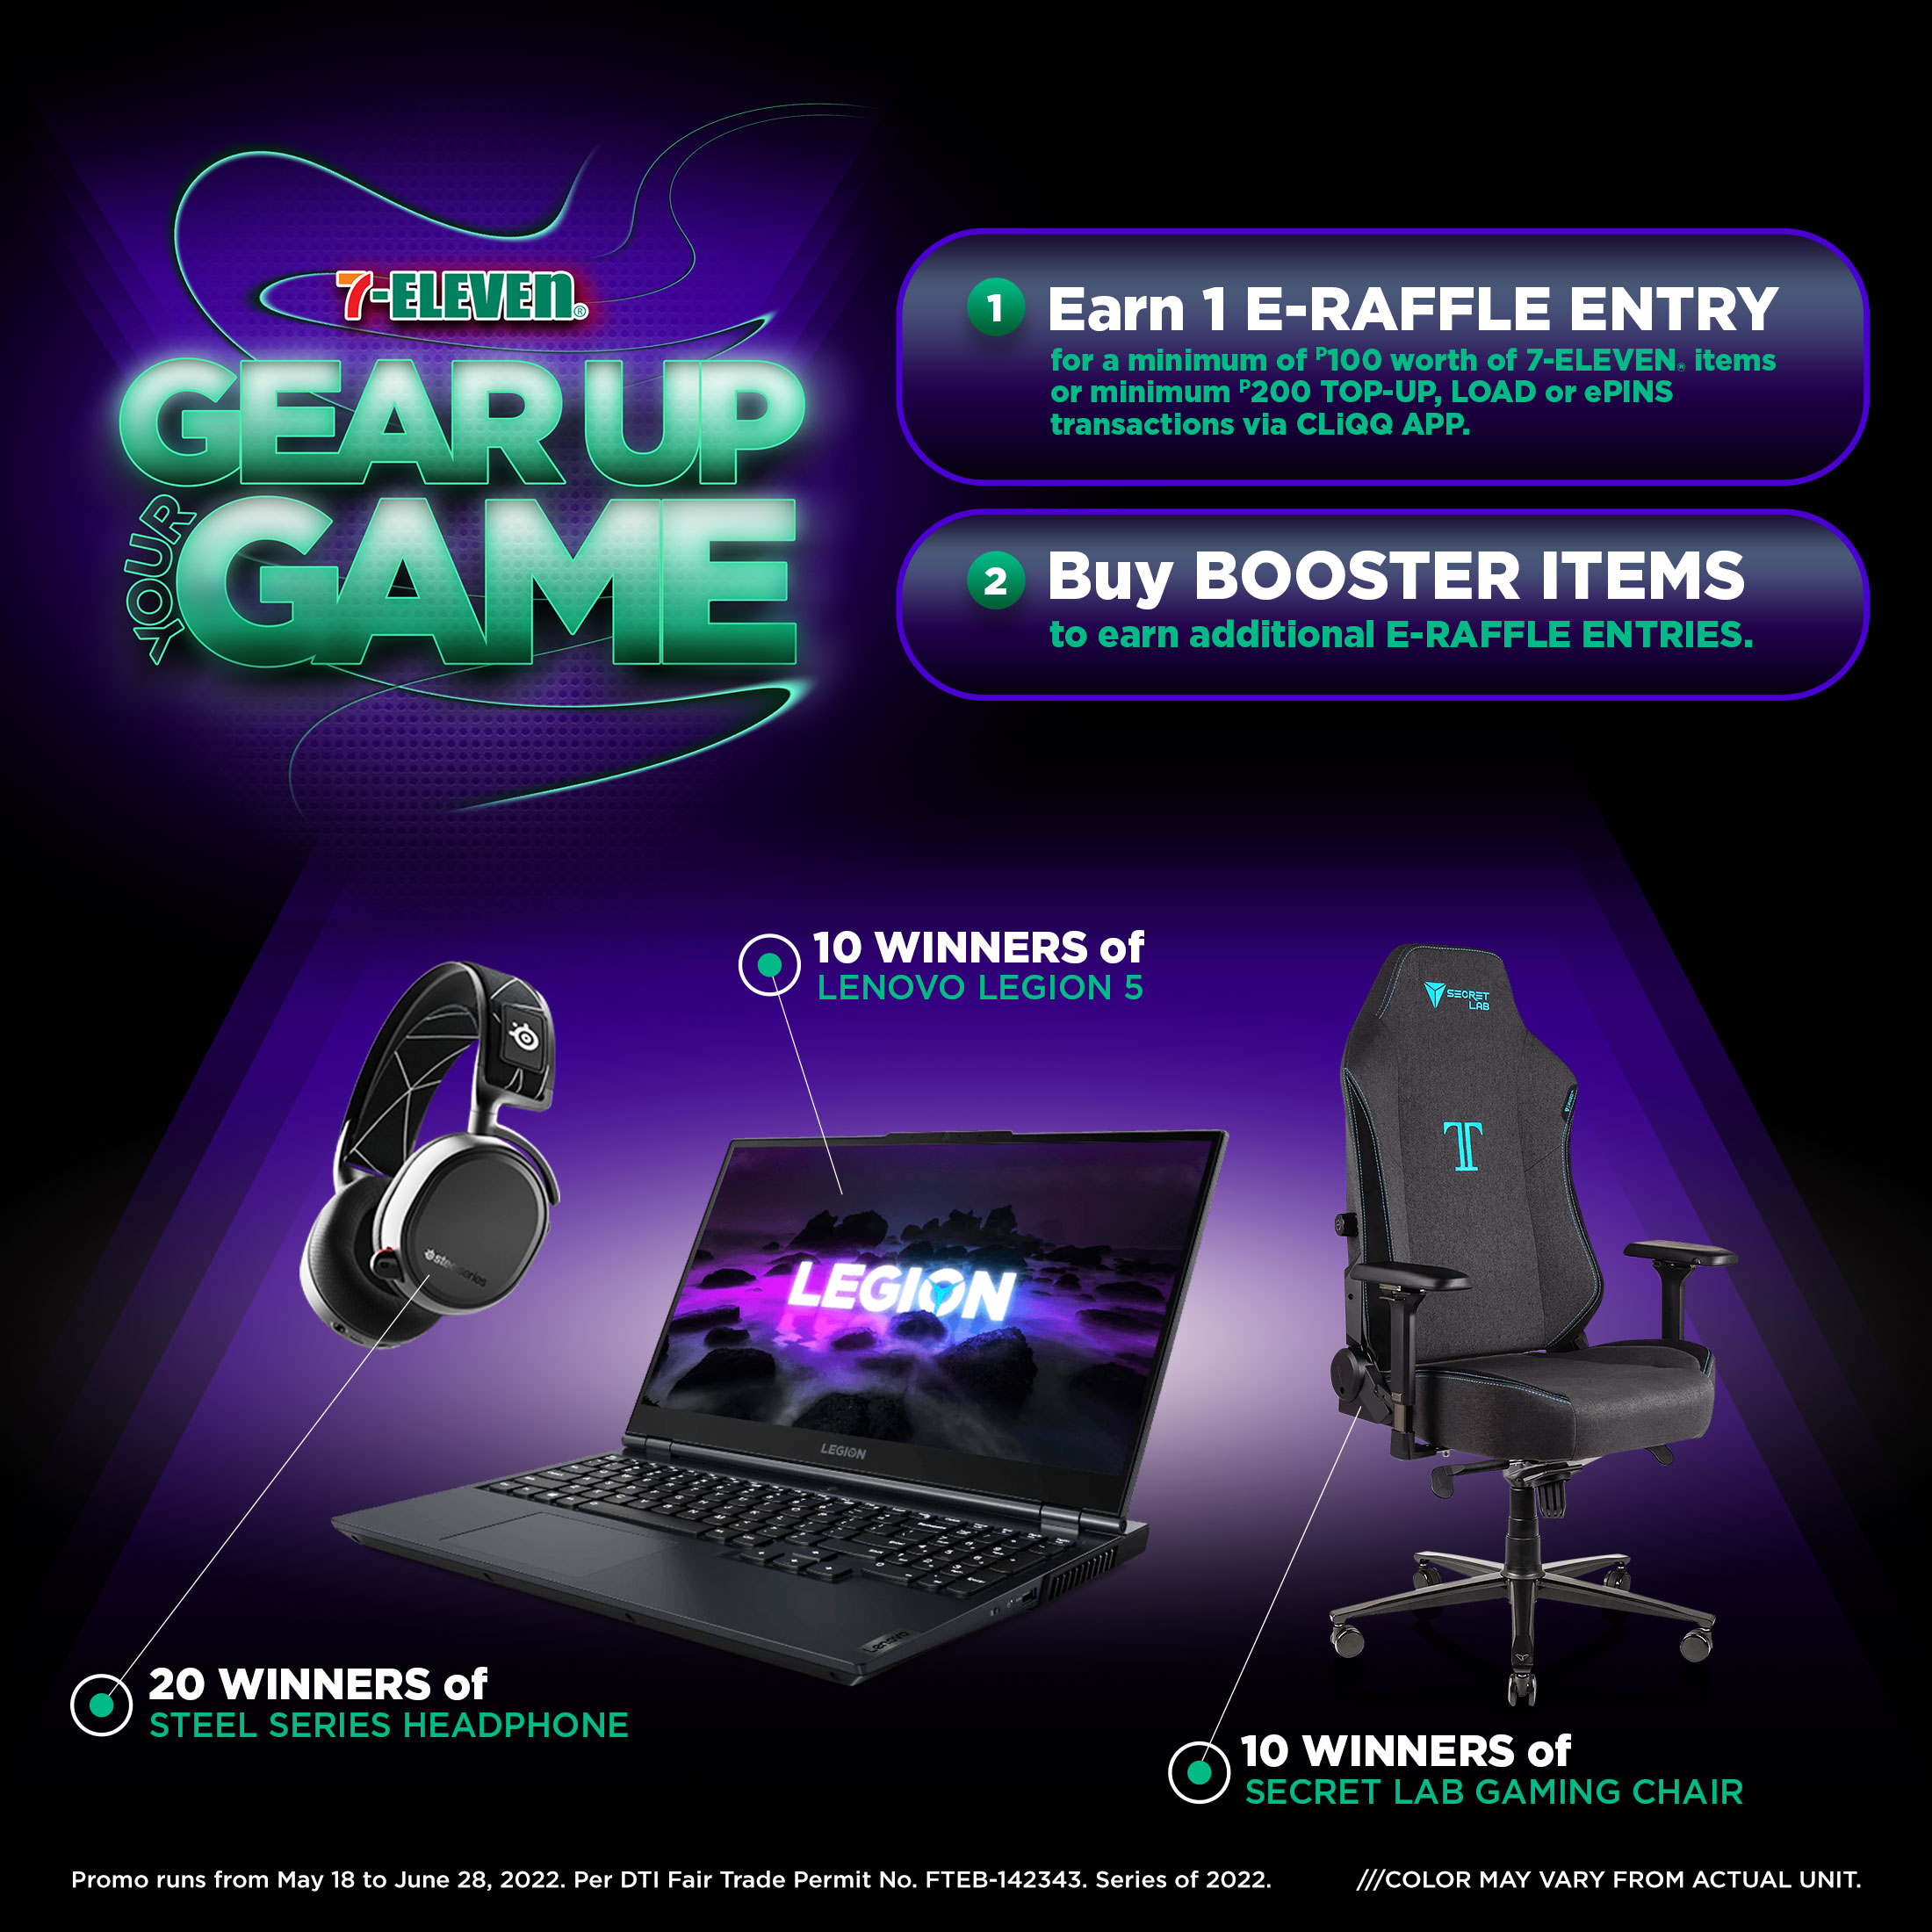 Gear Up Your Game Promo Winners